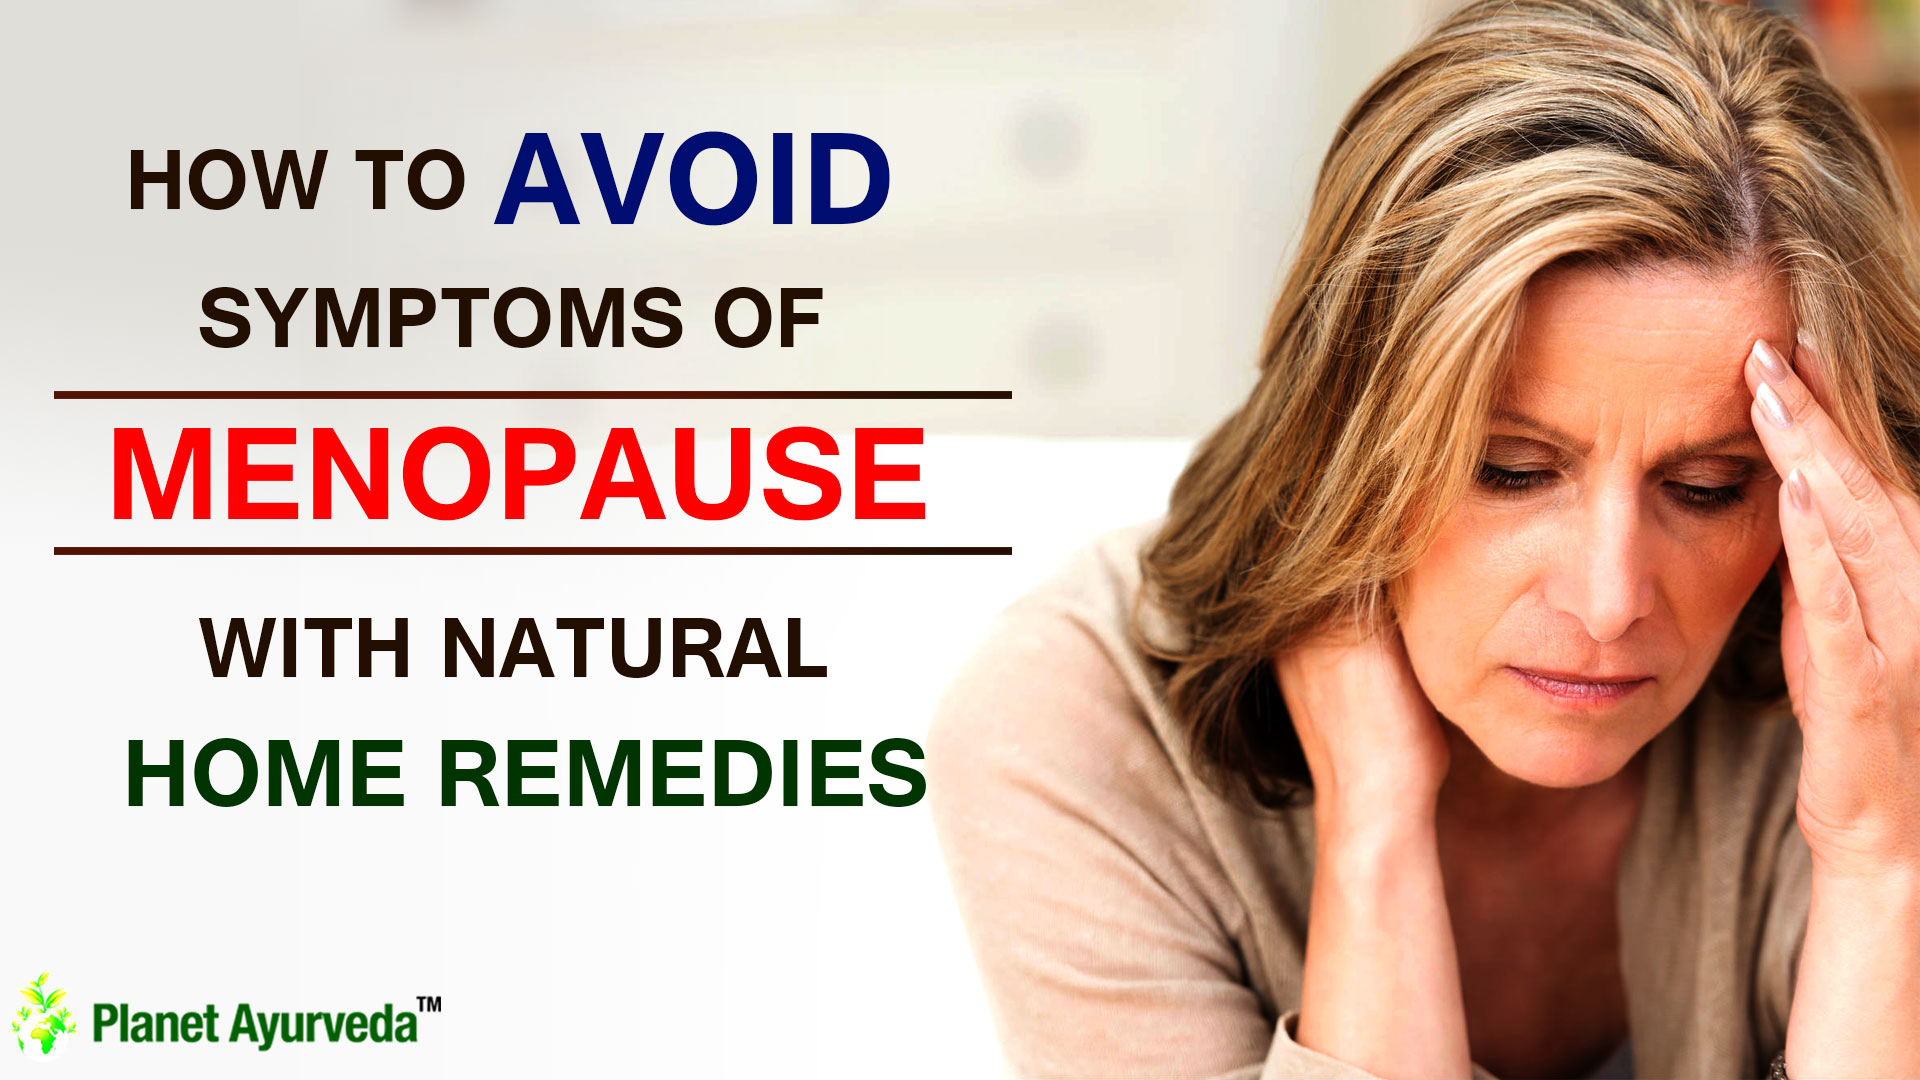 How to avoid symptoms of menopause with natural home remedies.